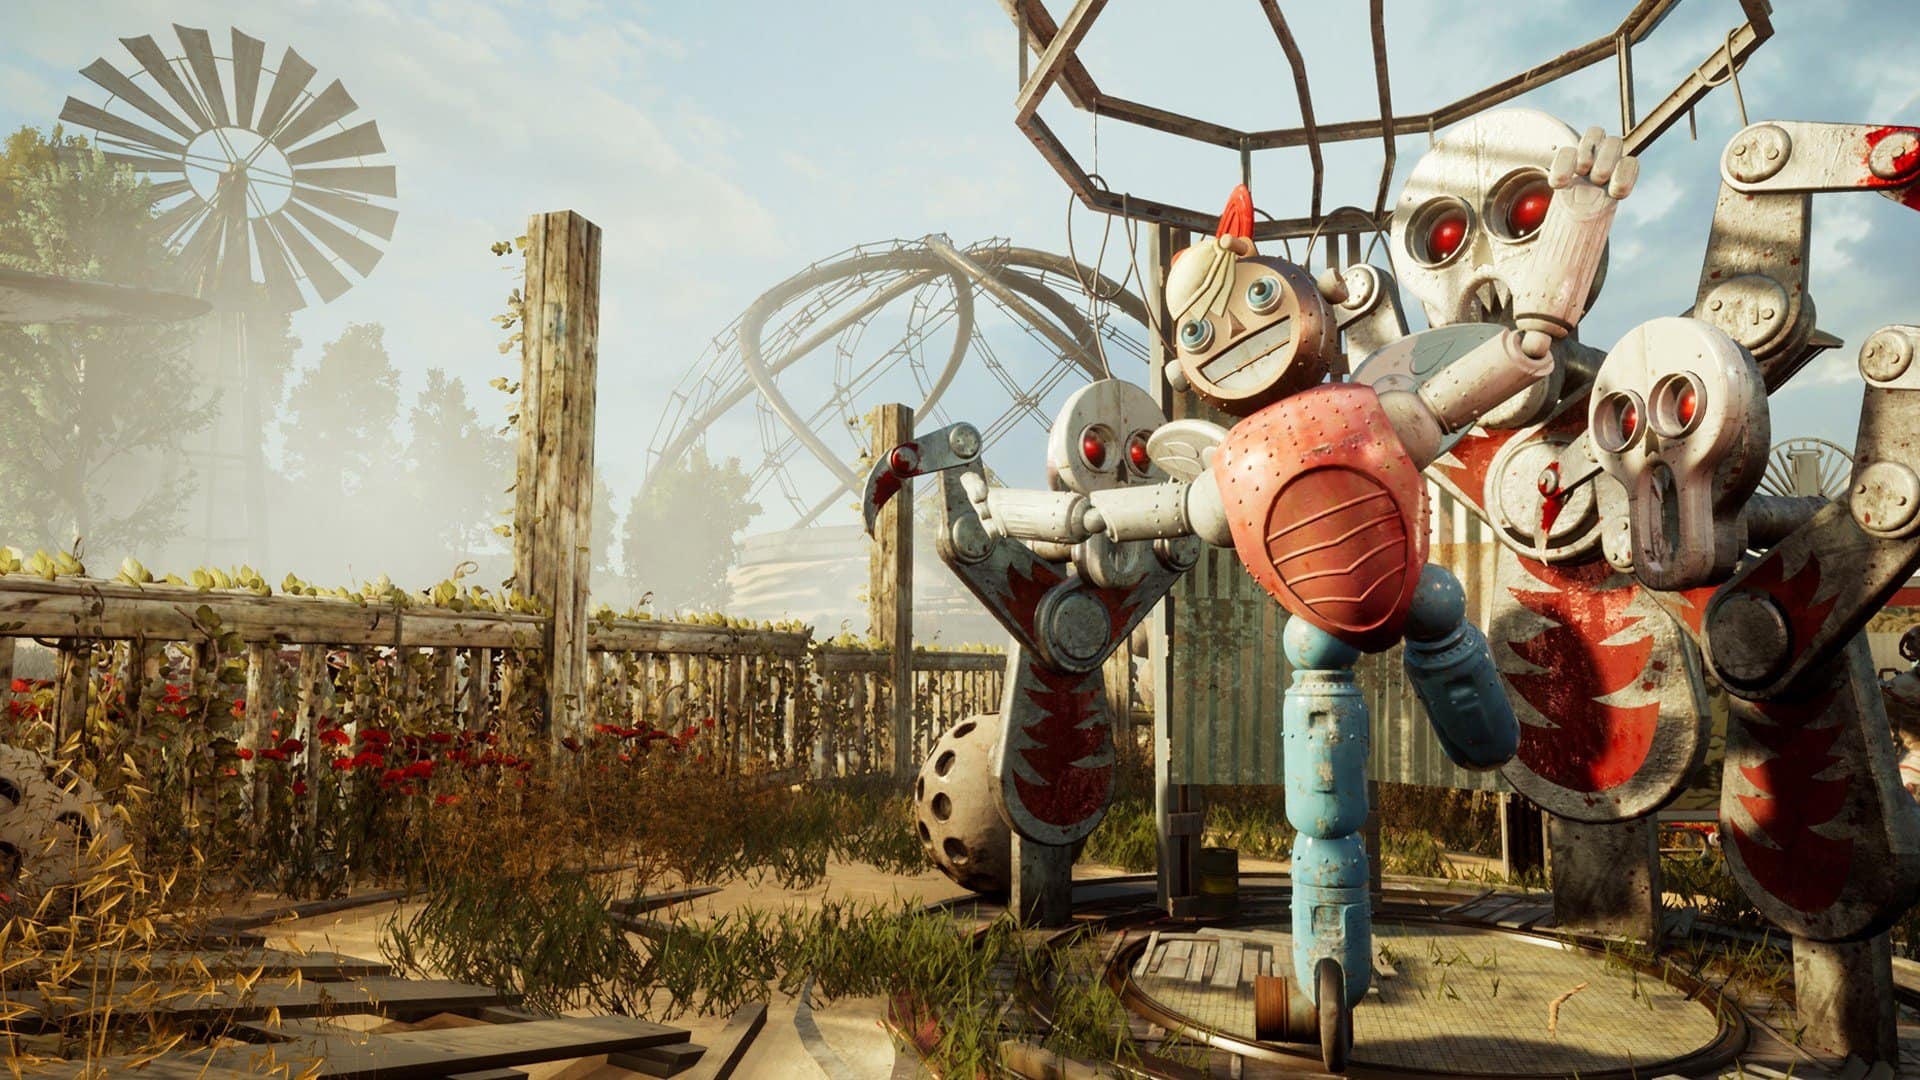 Atomic Heart Multiplayer Add-Ons Are Not Planned At This Stage